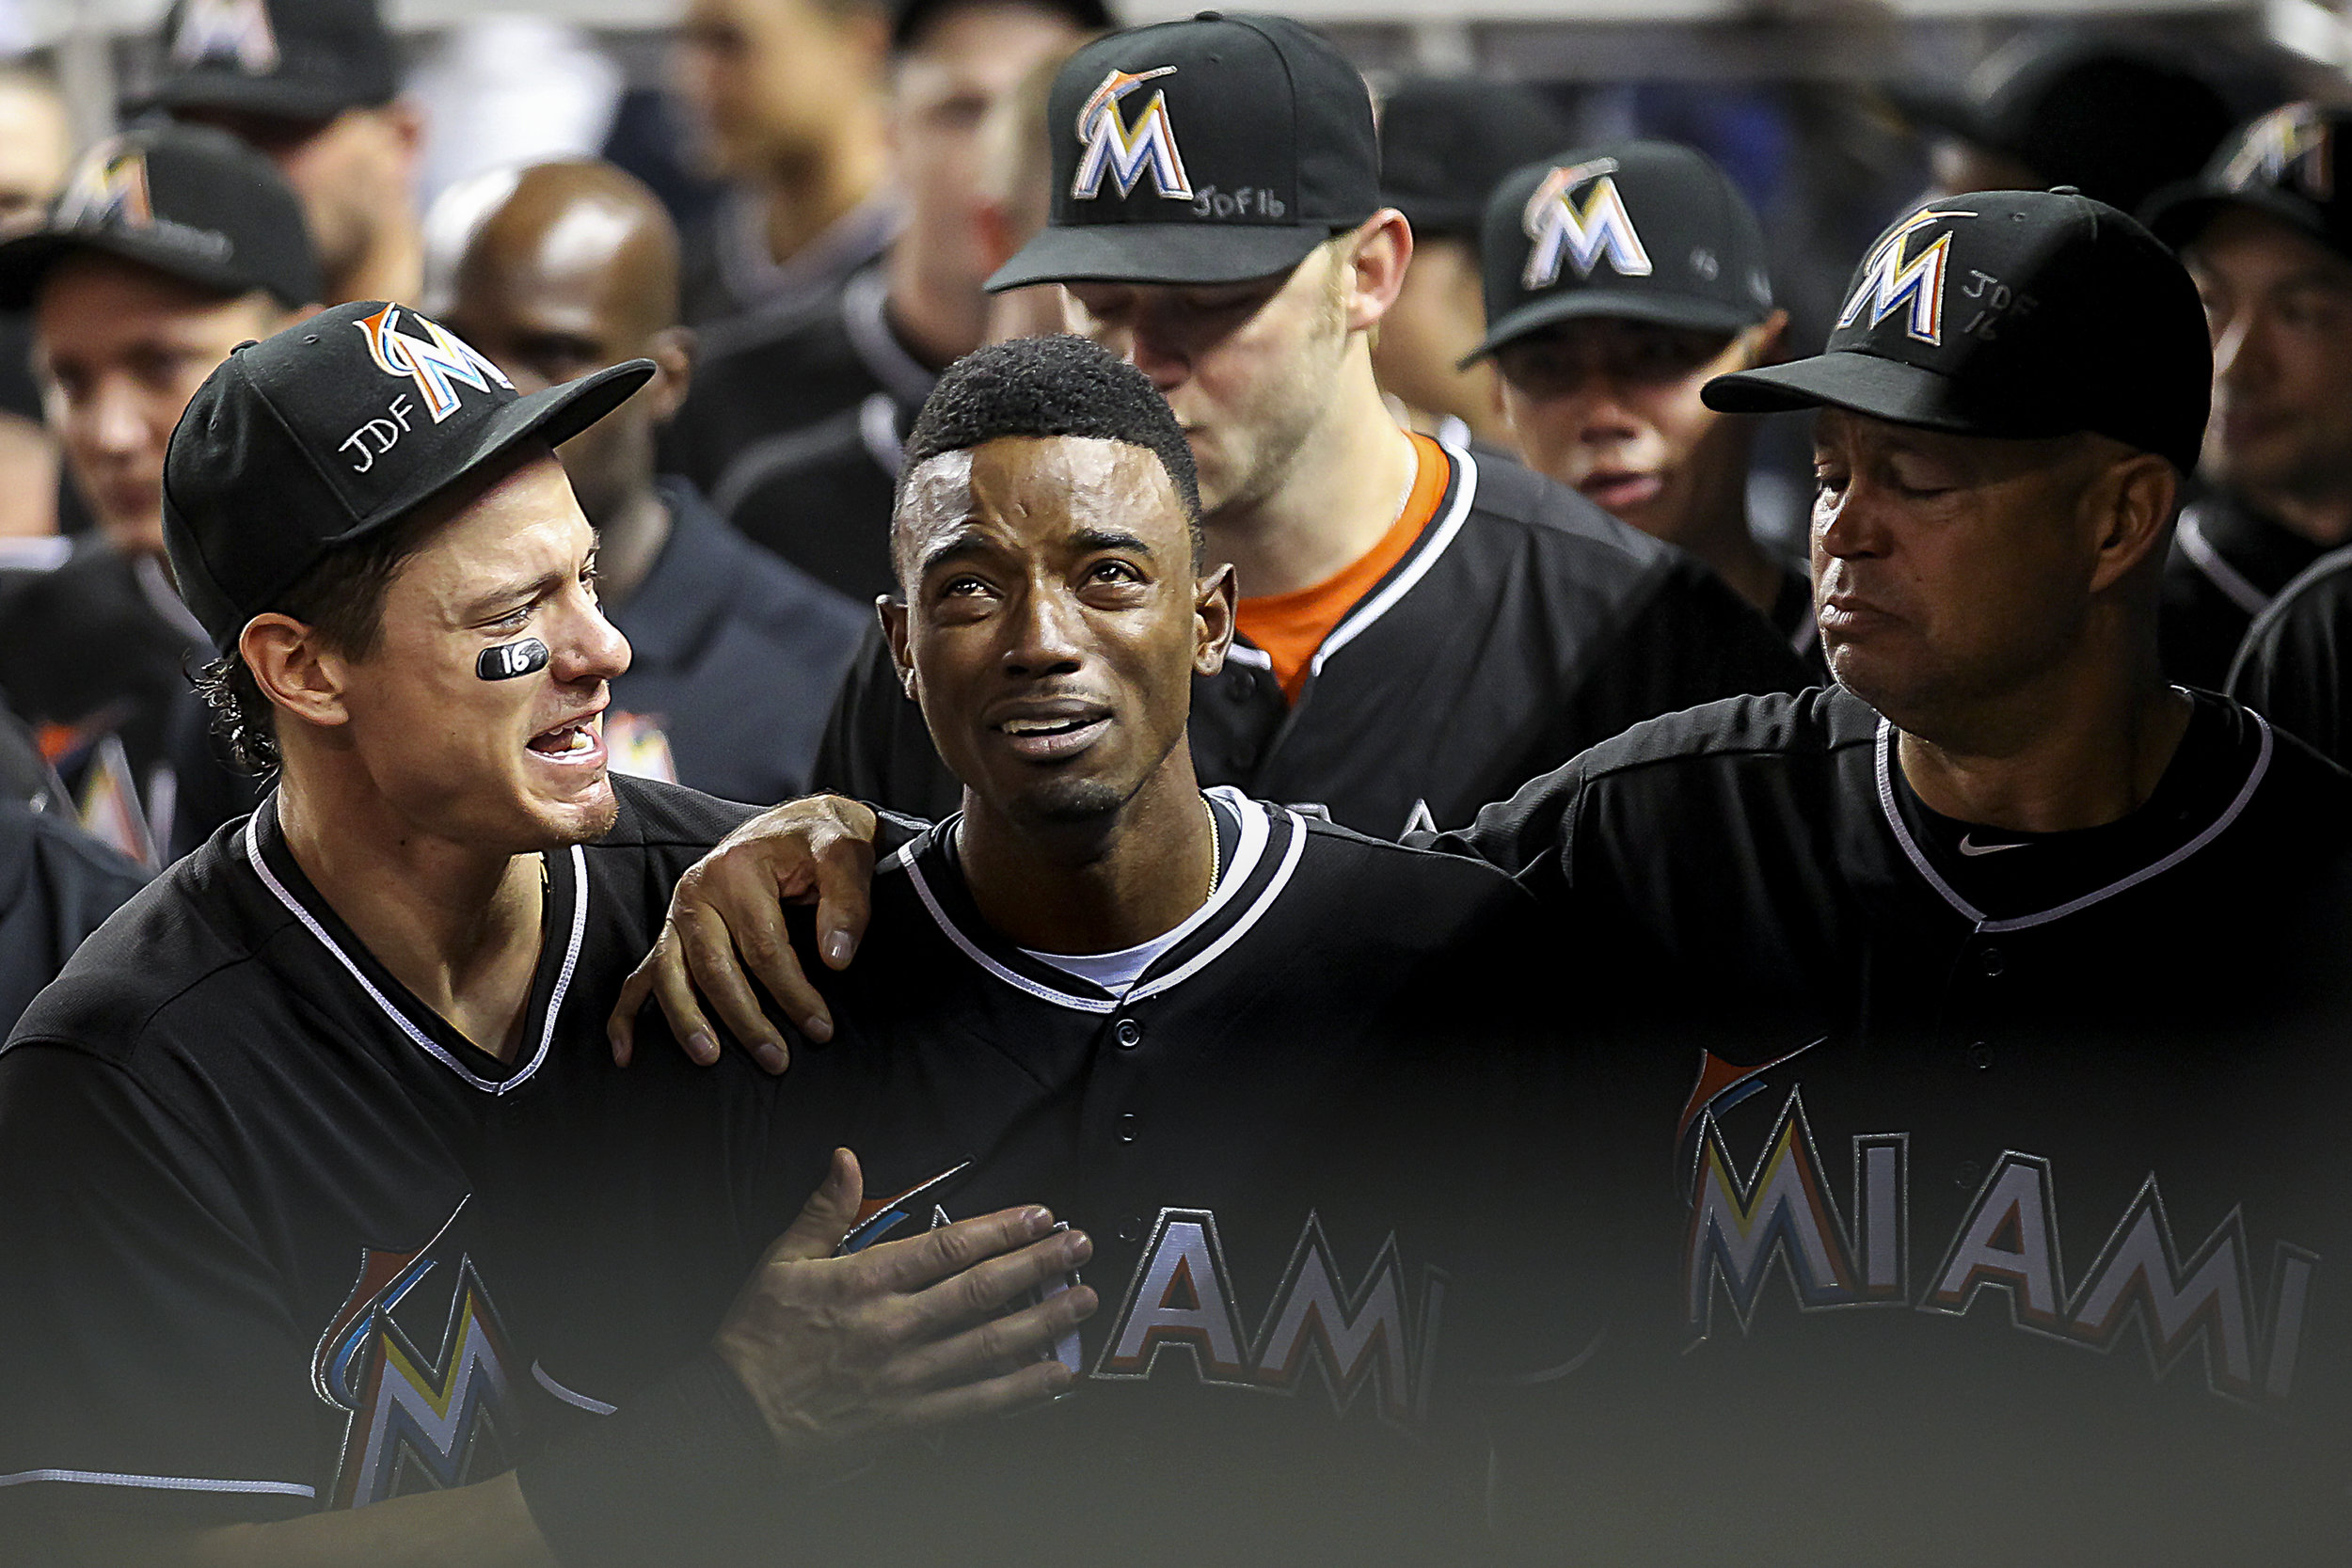  Miami Marlins' Dee Gordon (9), center, is comforted by Derek Dietrich (32), left, after hitting a home run during the first inning of a baseball game against the New York Mets at Marlins Park in Little Havana on Mon., Sept. 26, 2016. This is the fir